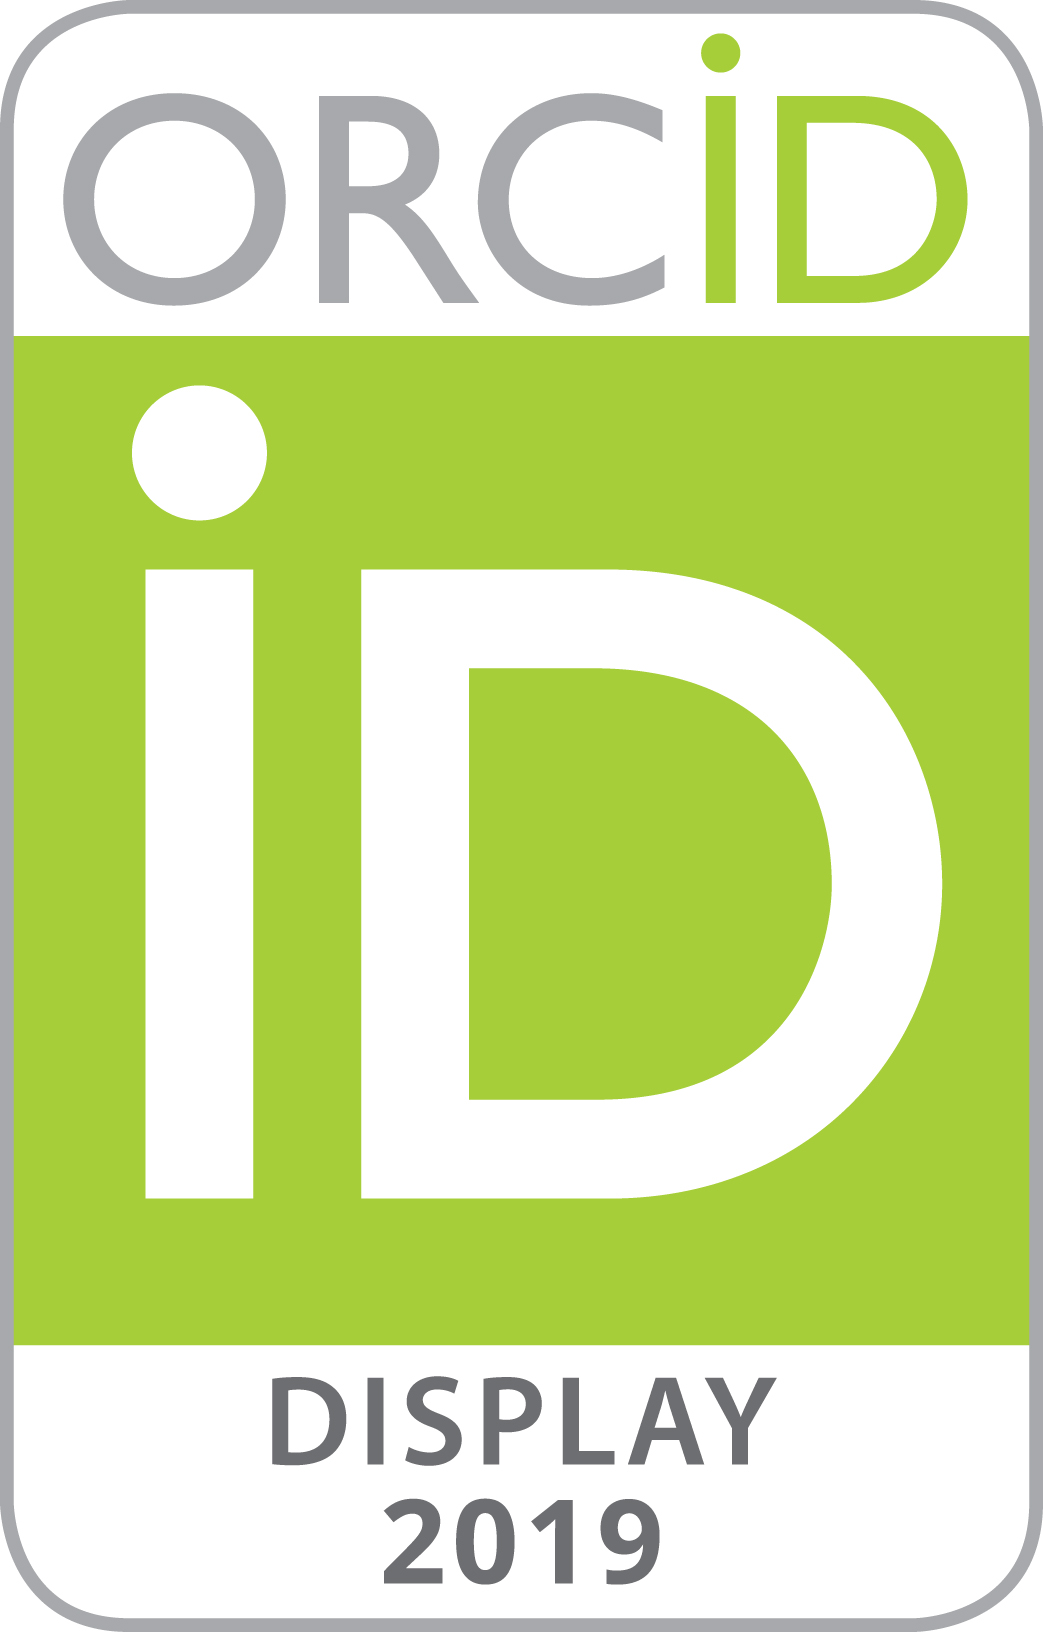 ORCID AUTHENTICATE DISPLAY 2019